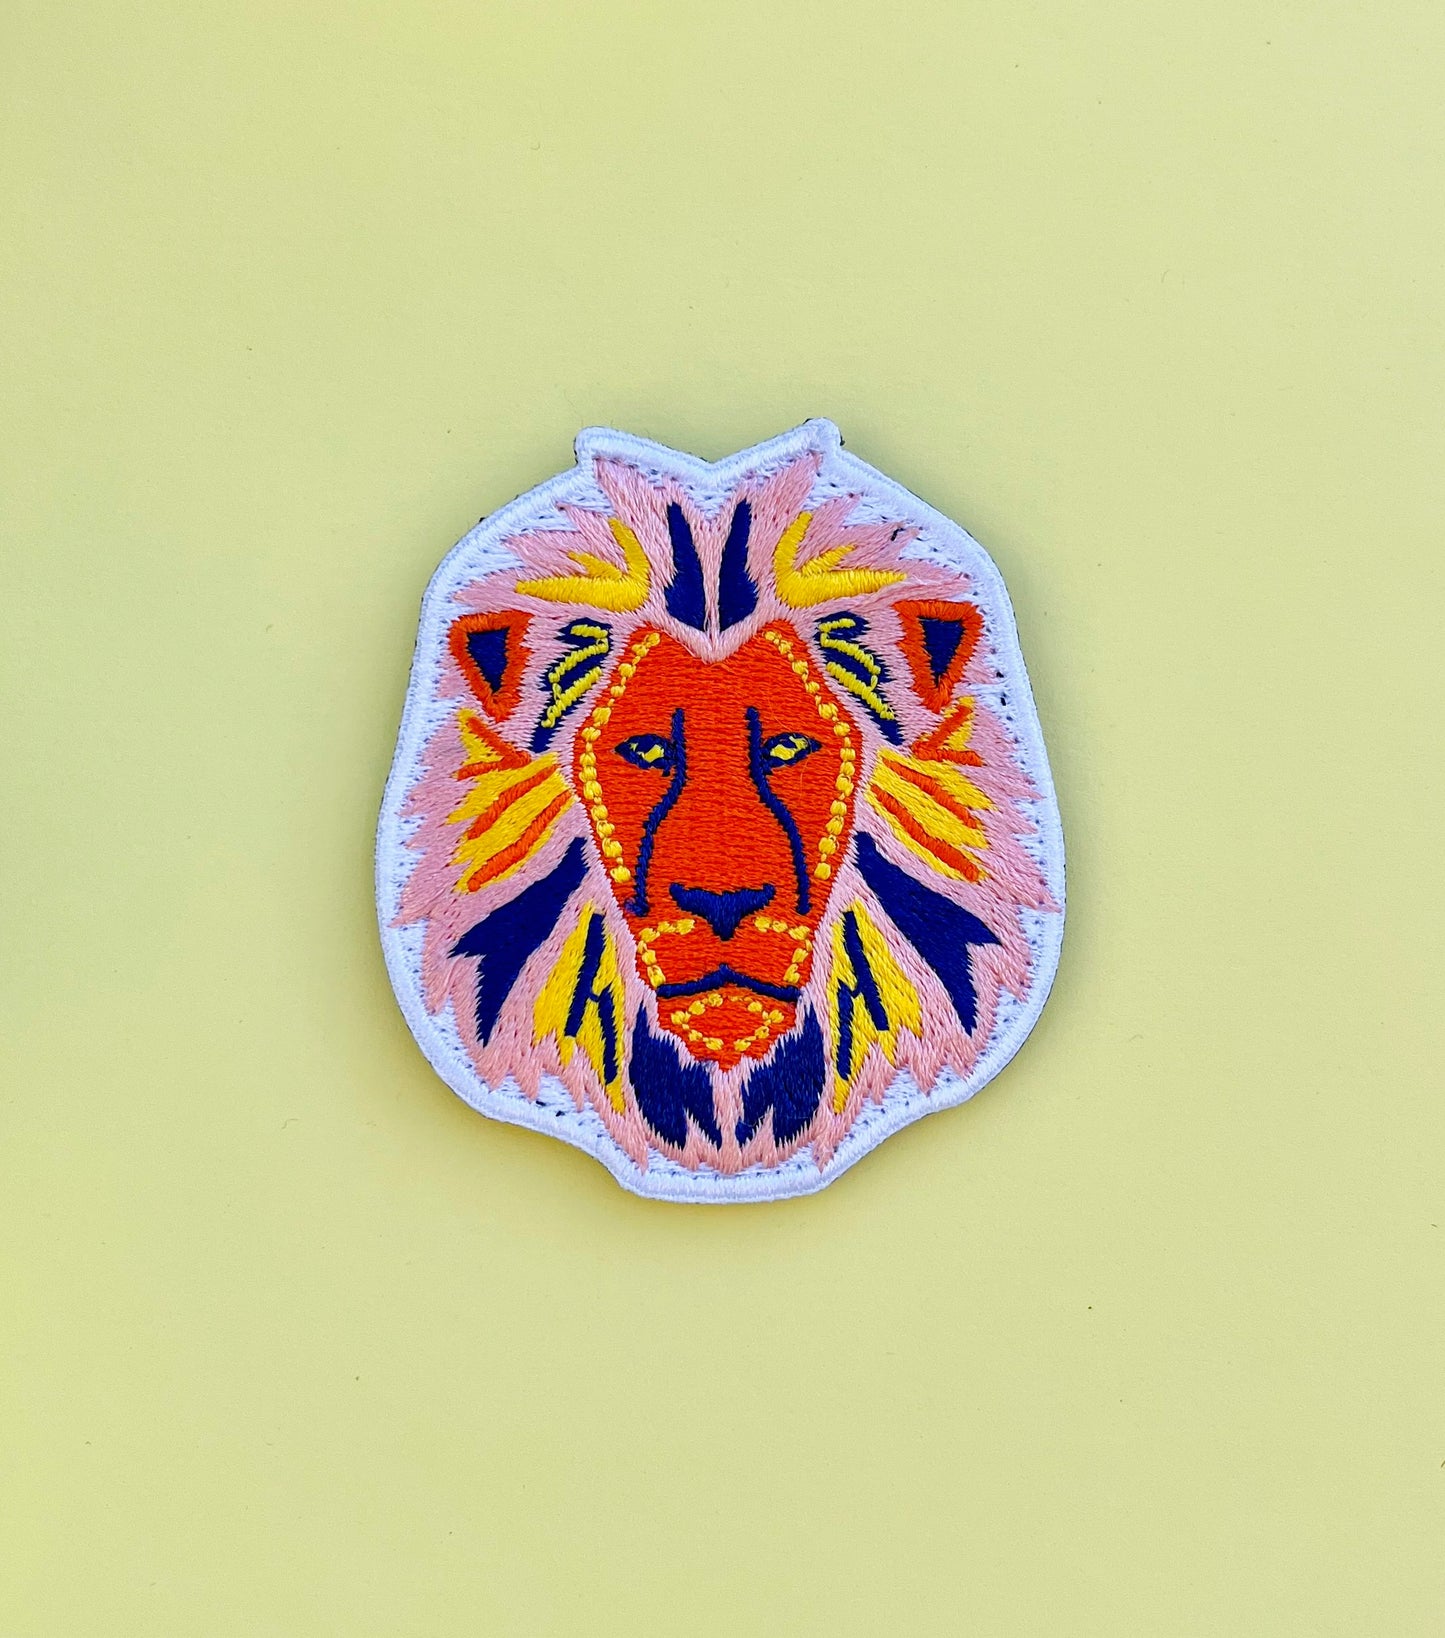 PATCH "LION KING"